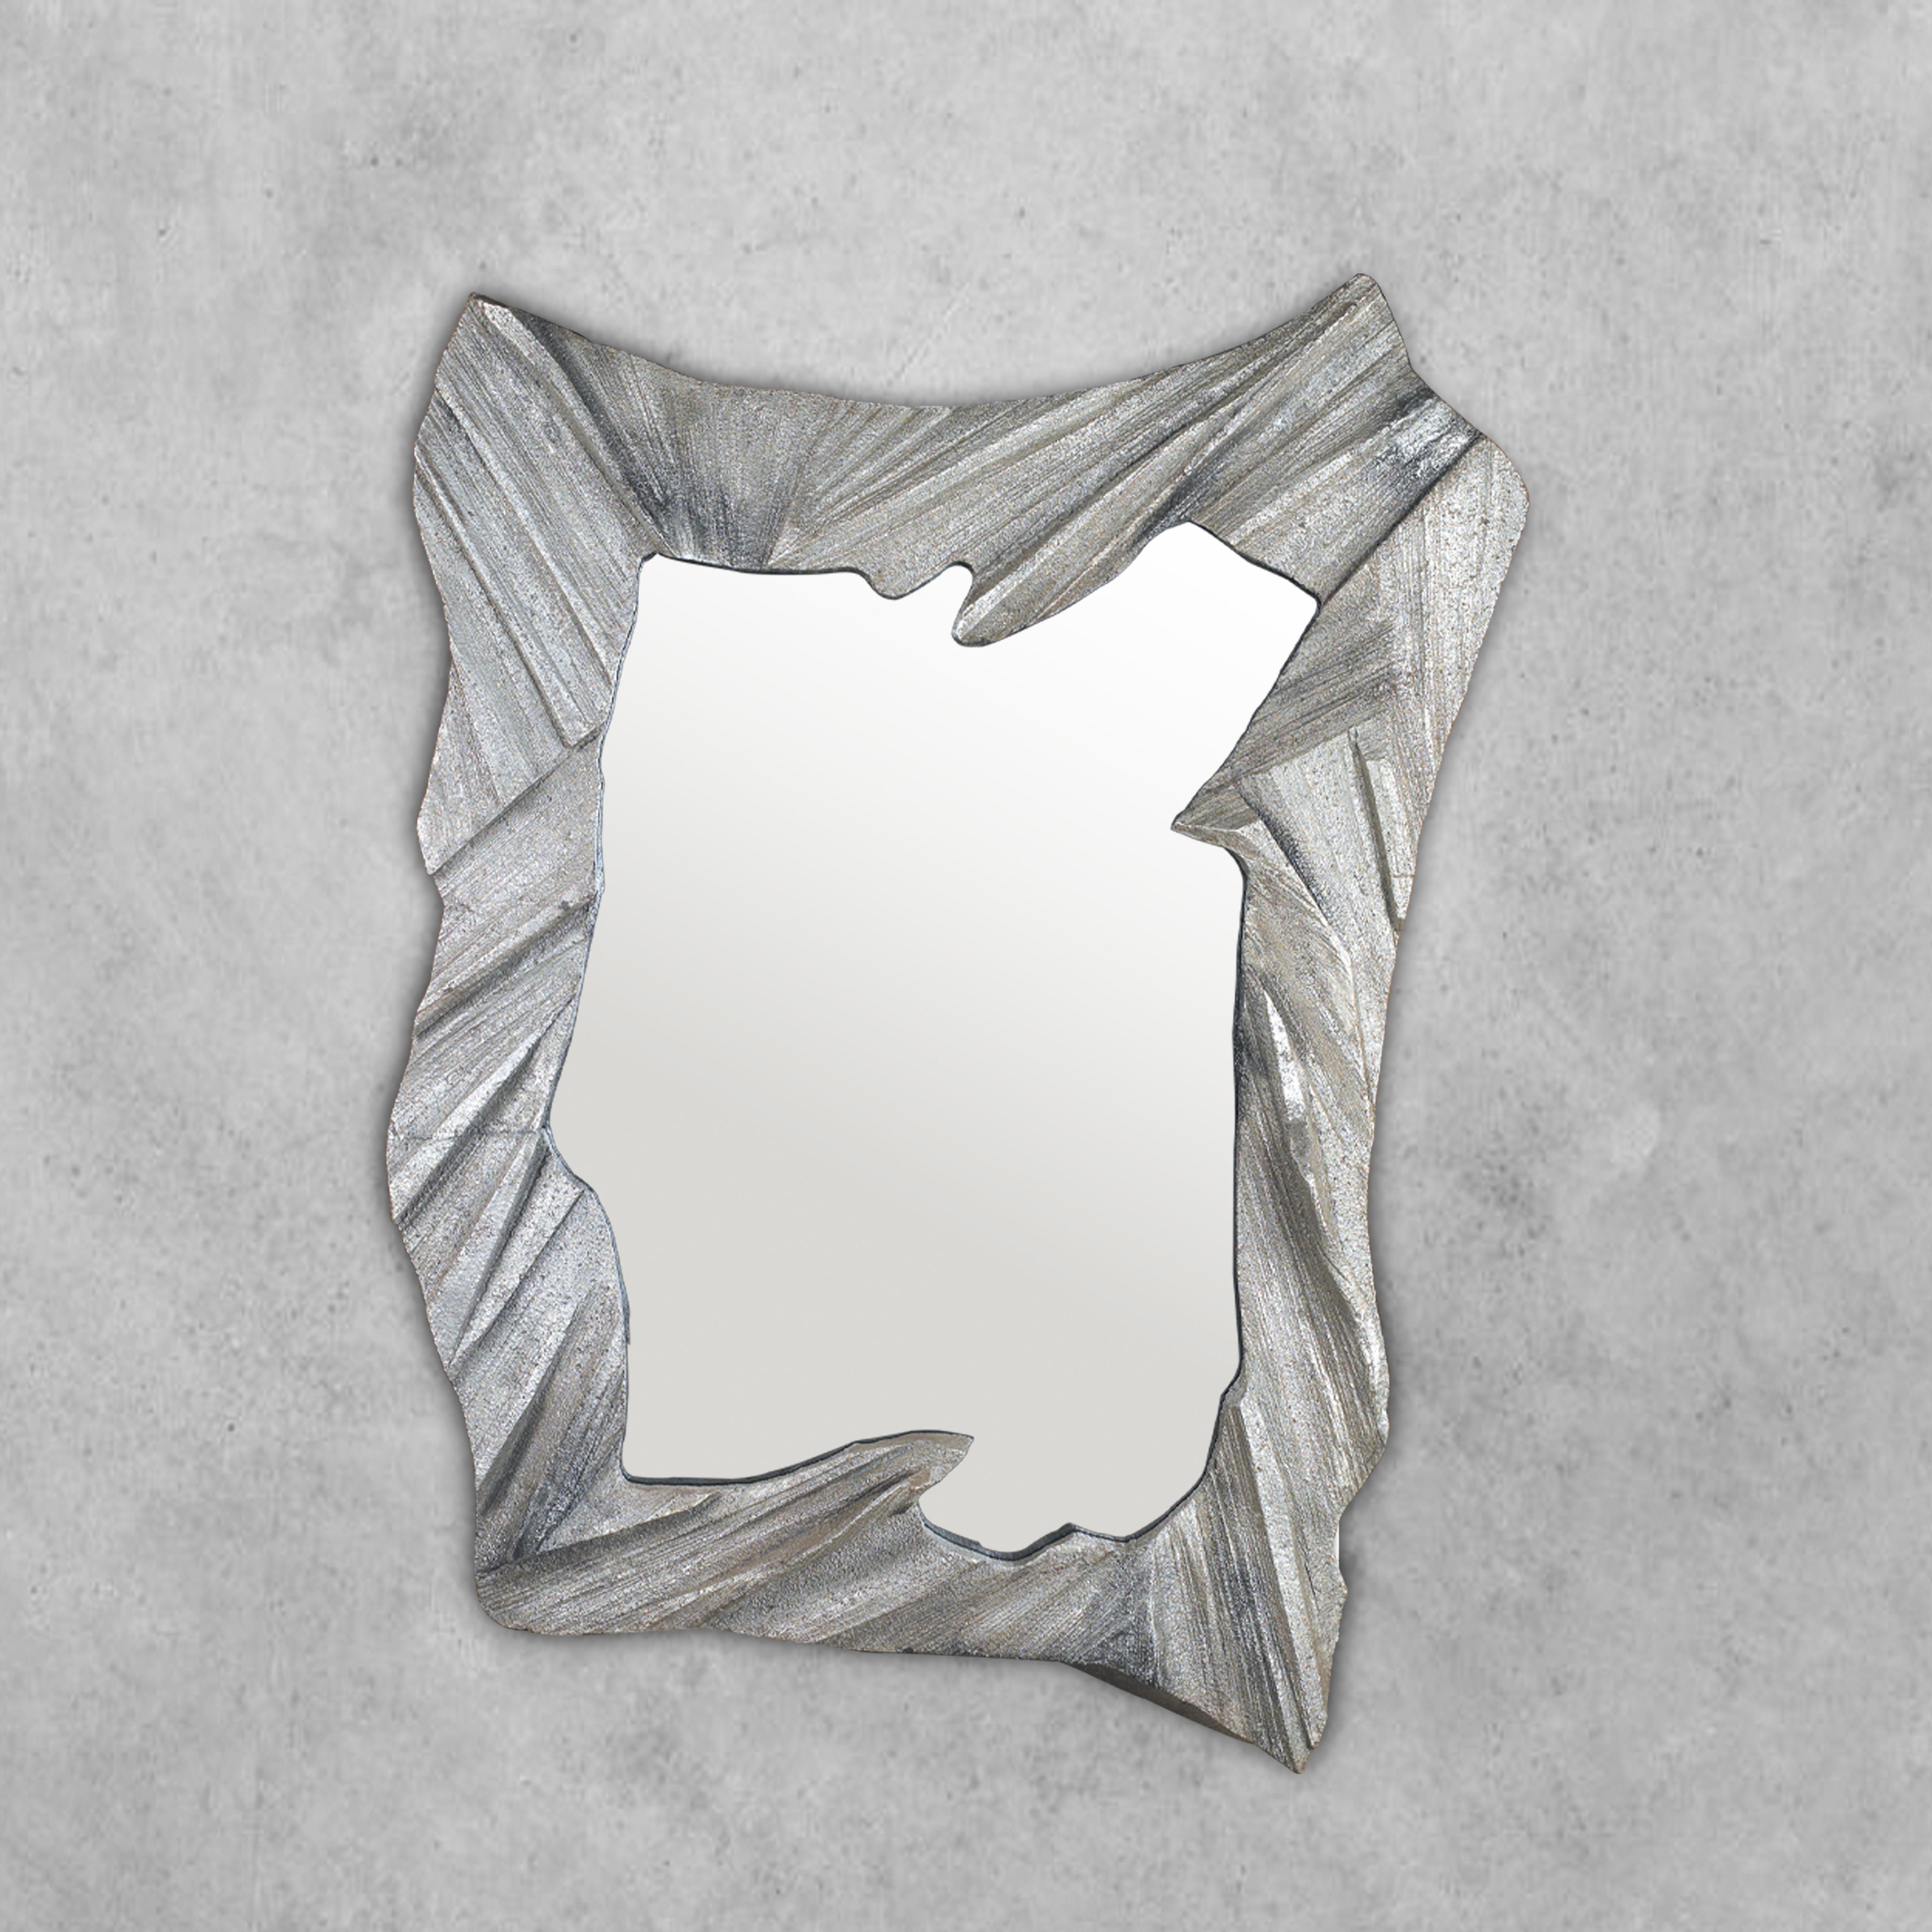 inspired by nature and realized by a technique developed especially for Farrago Design, this sculpture mirror is individually sand-cast in Aluminum. The molds are hand-carved in packing styrofoam and can be used only once, making this piece truly